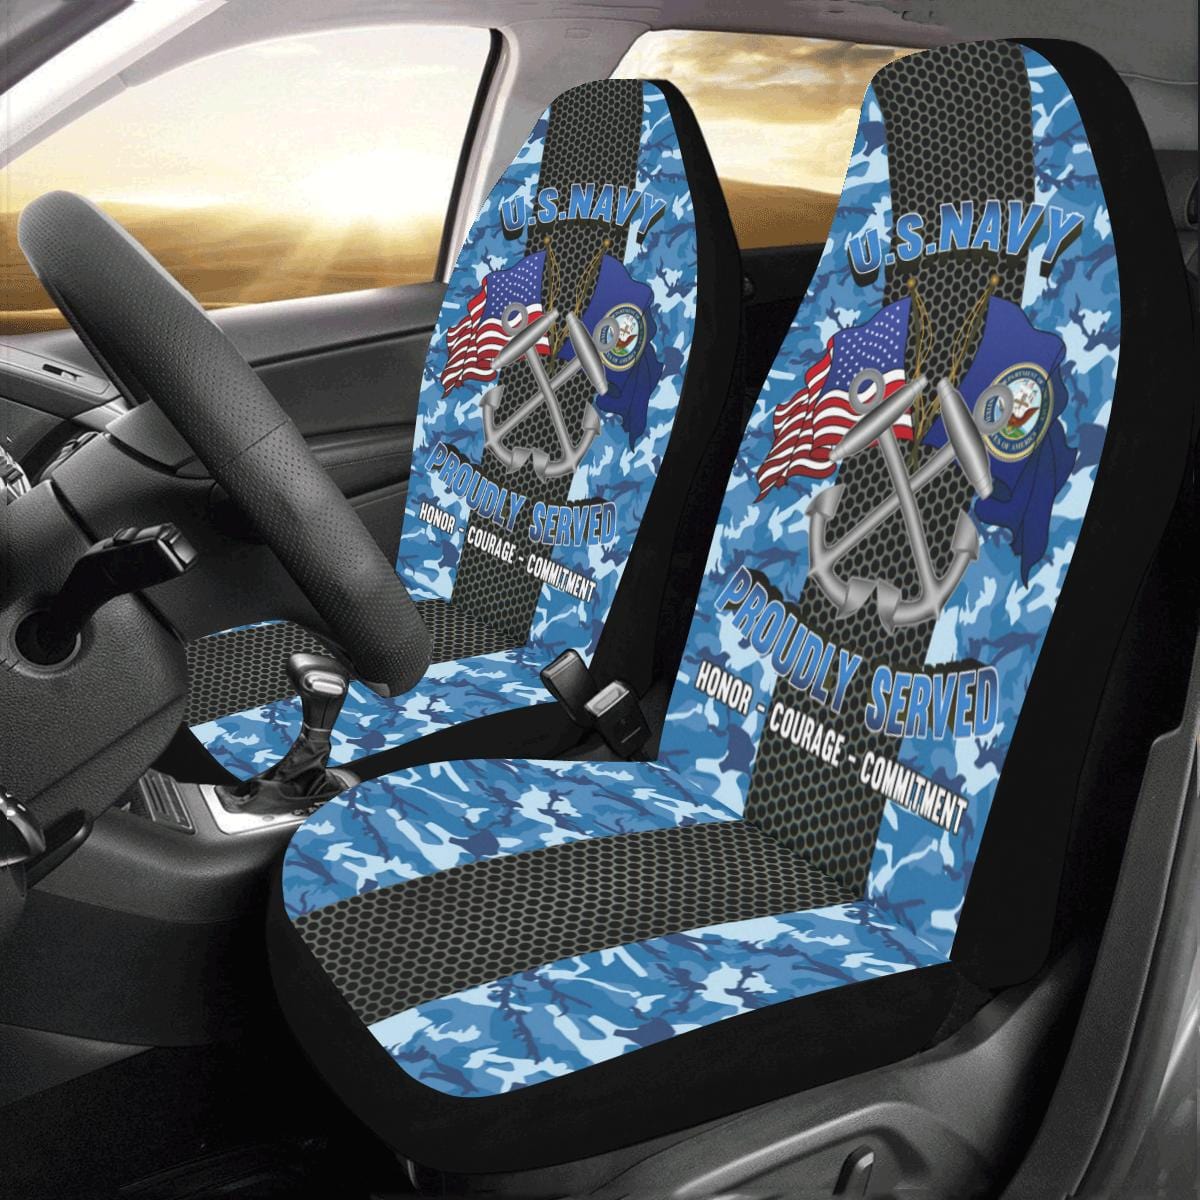 U.S Navy Boatswain's Mate Navy BM Car Seat Covers (Set of 2)-SeatCovers-Navy-Rate-Veterans Nation